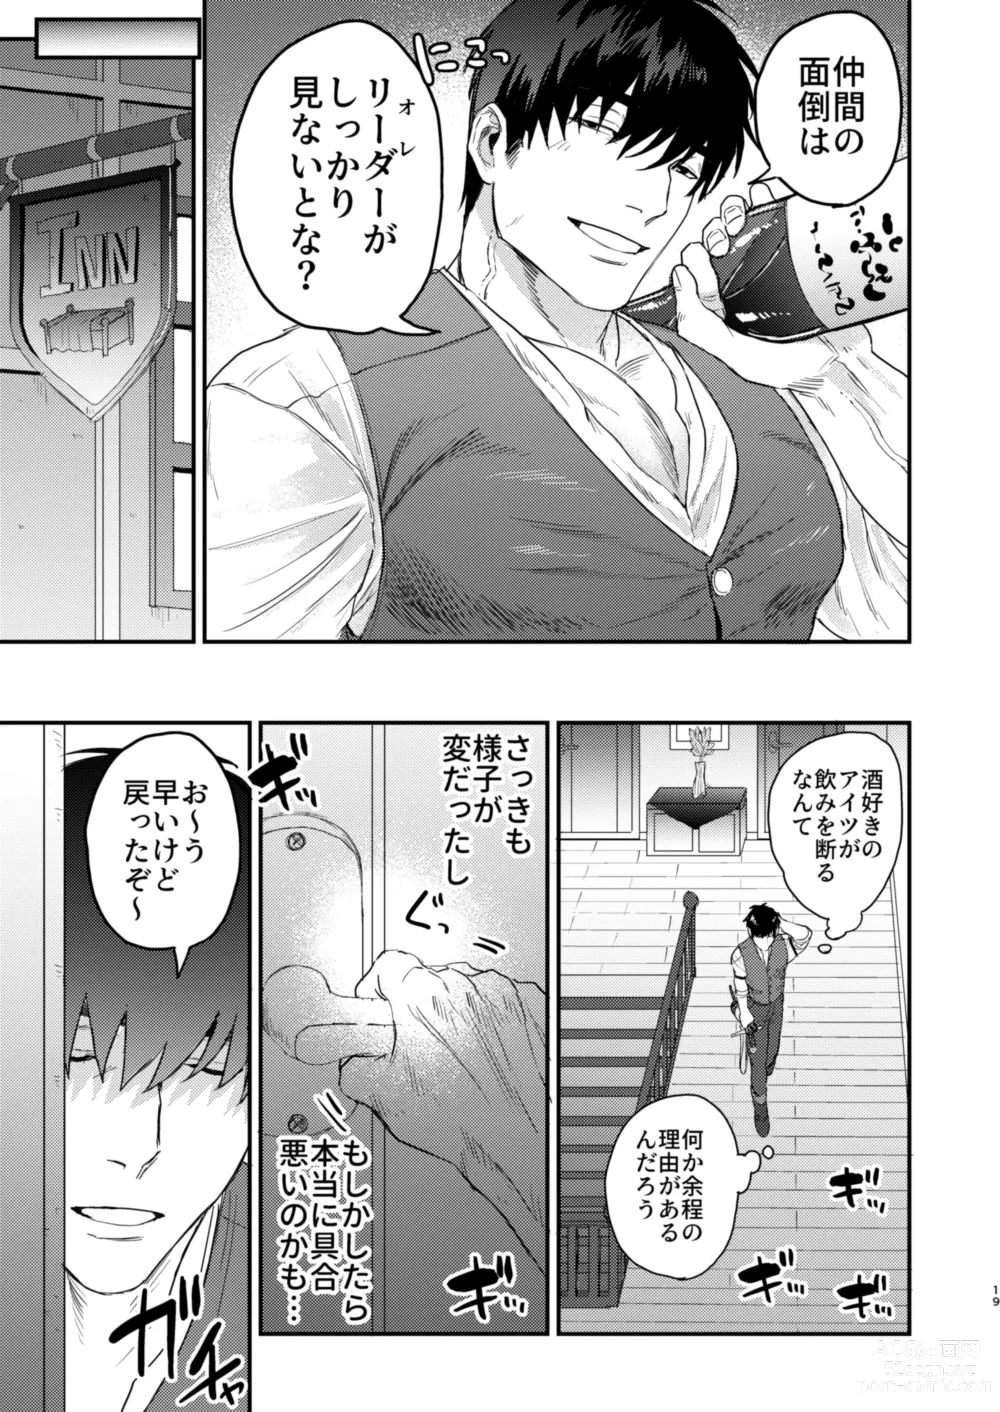 Page 16 of doujinshi It Looks like My Dog is in Heat